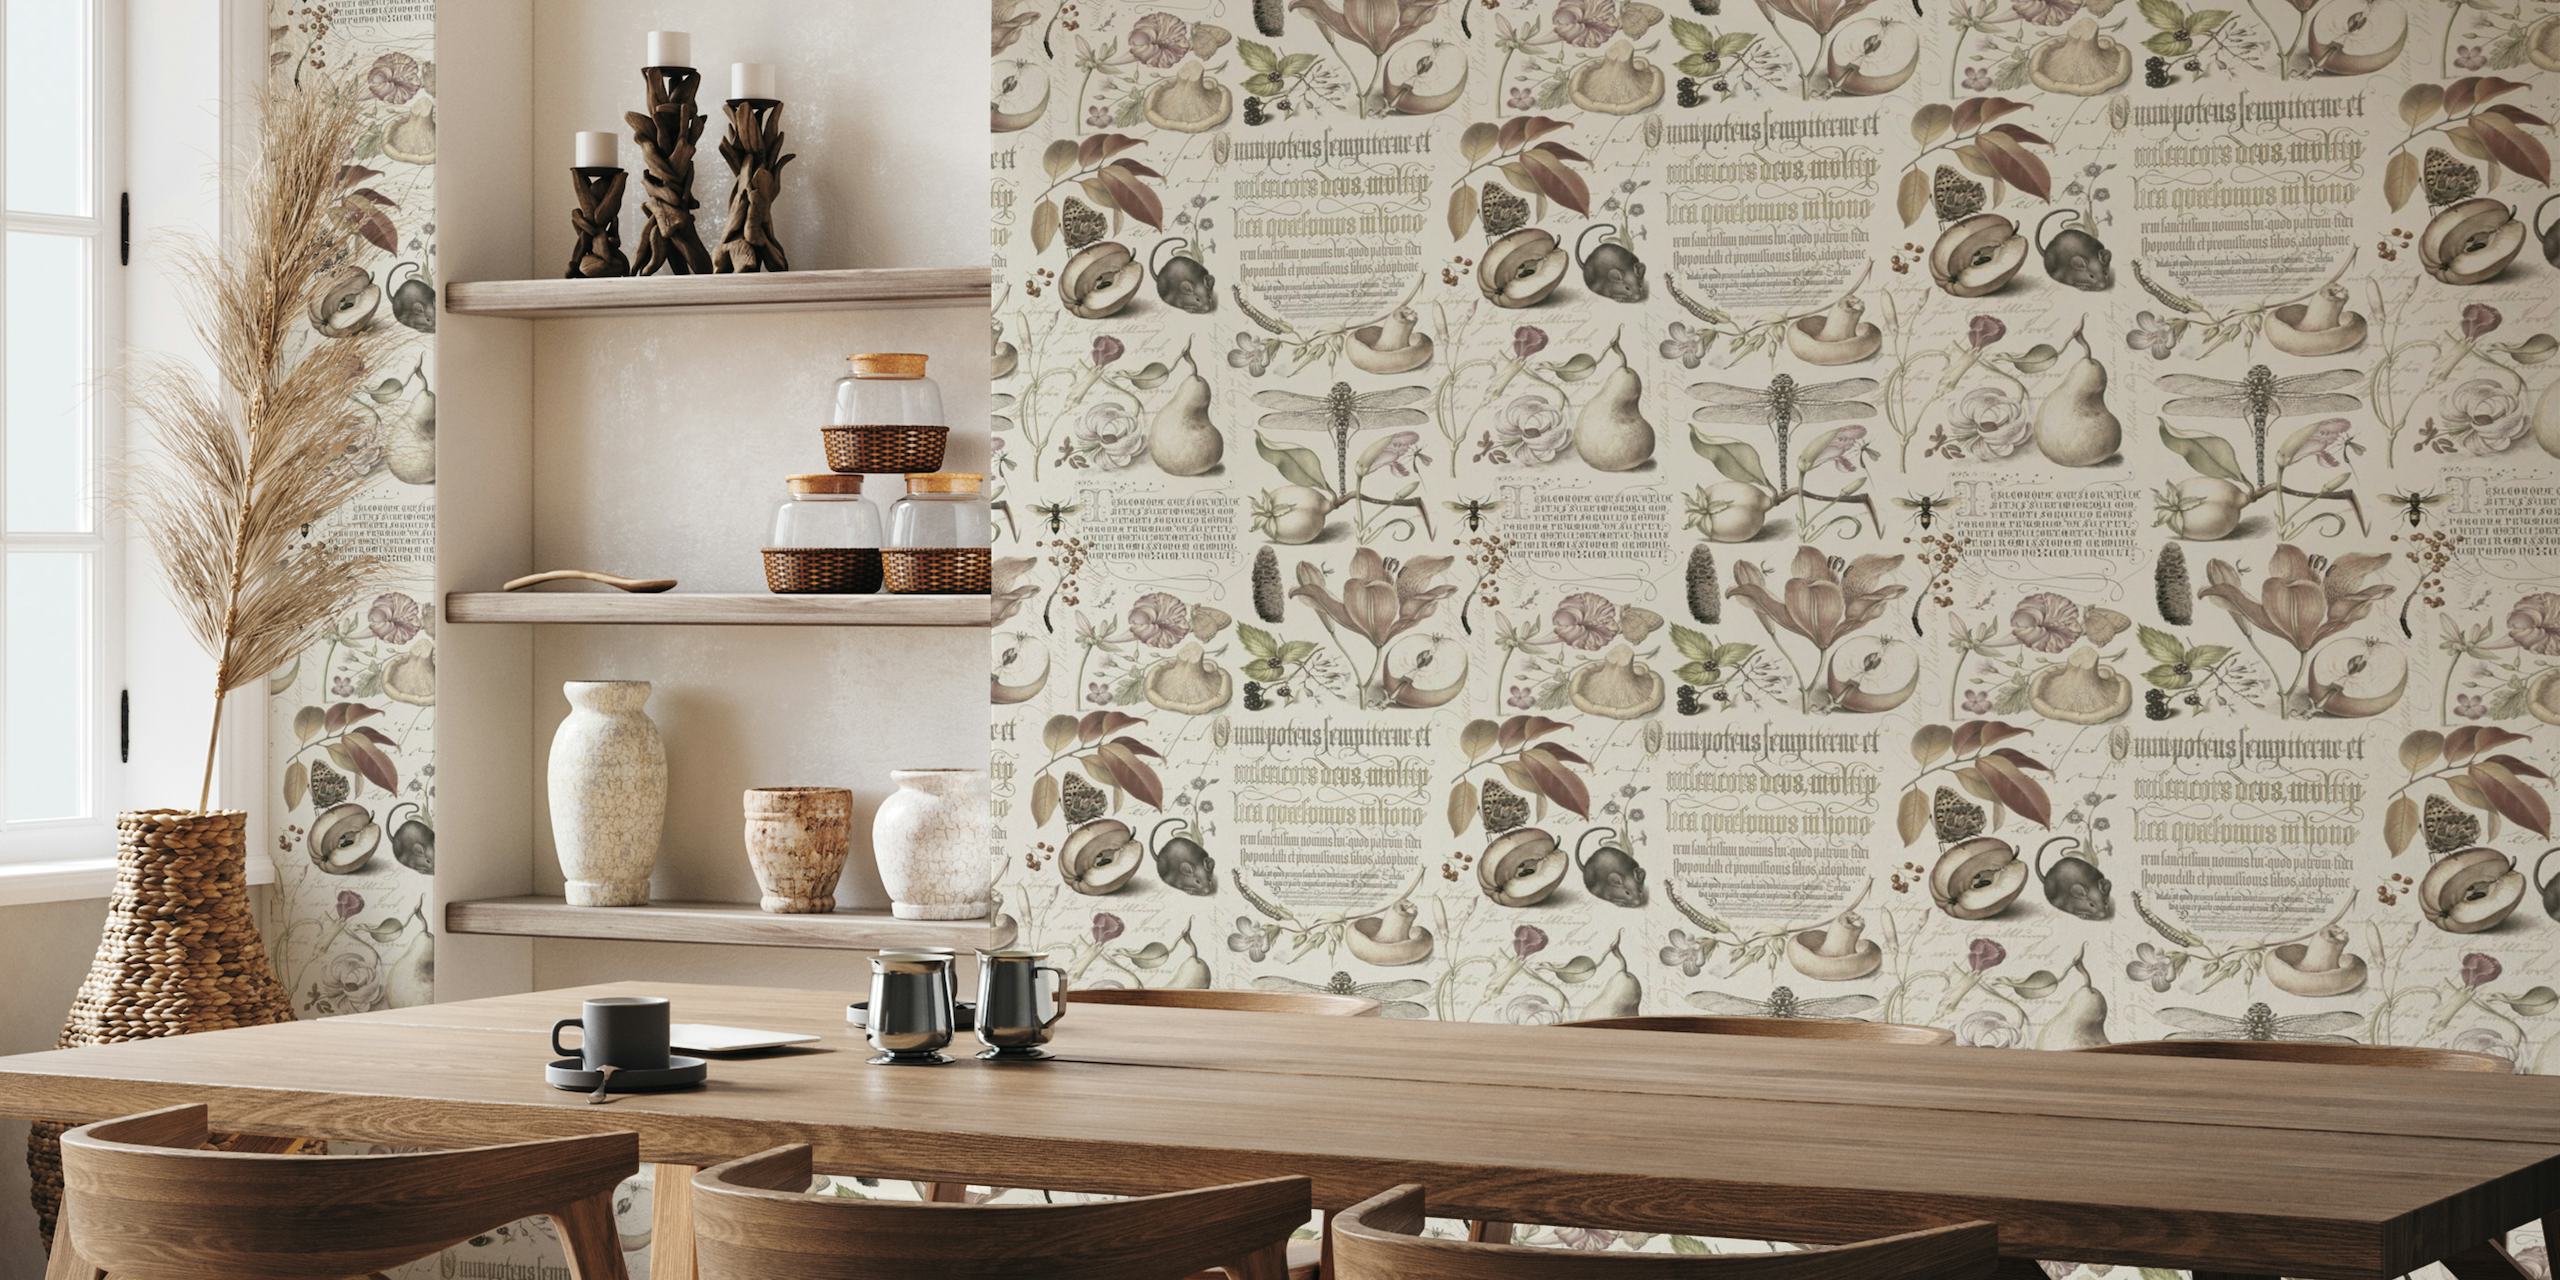 Botanical Treasures By Joris Hoefnagel With Plants, Fruits And Calligraphy Neutral Beige tapete